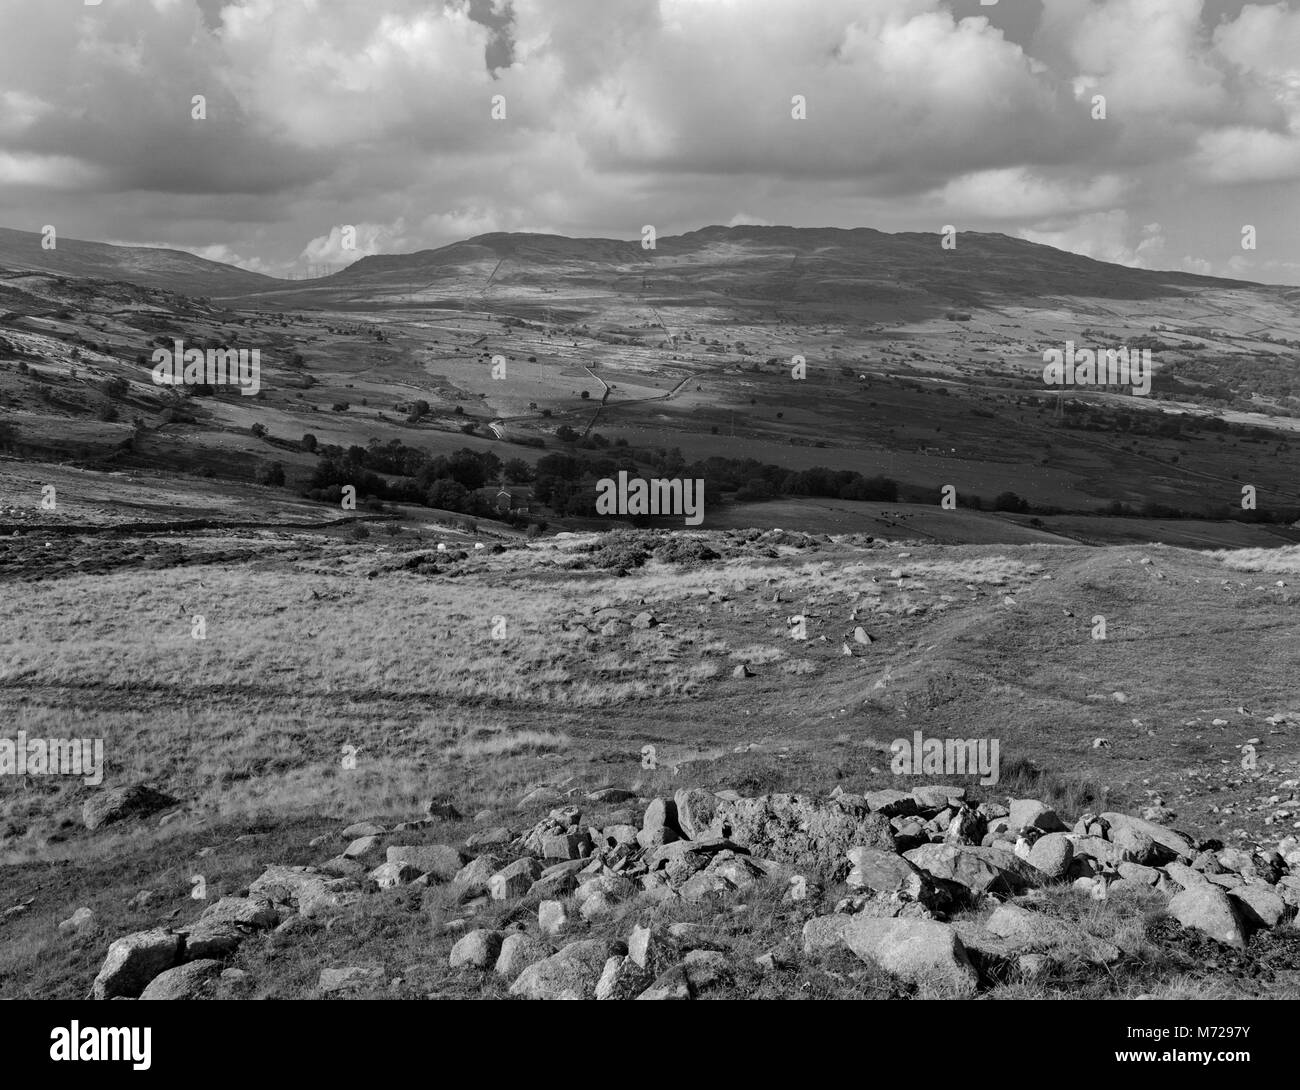 Pen y Gaer Iron Age hillfort, North Wales: view NNW over chevaux-de-frise defences (small upright stones) & linear earthwork outside the W entrance. Stock Photo